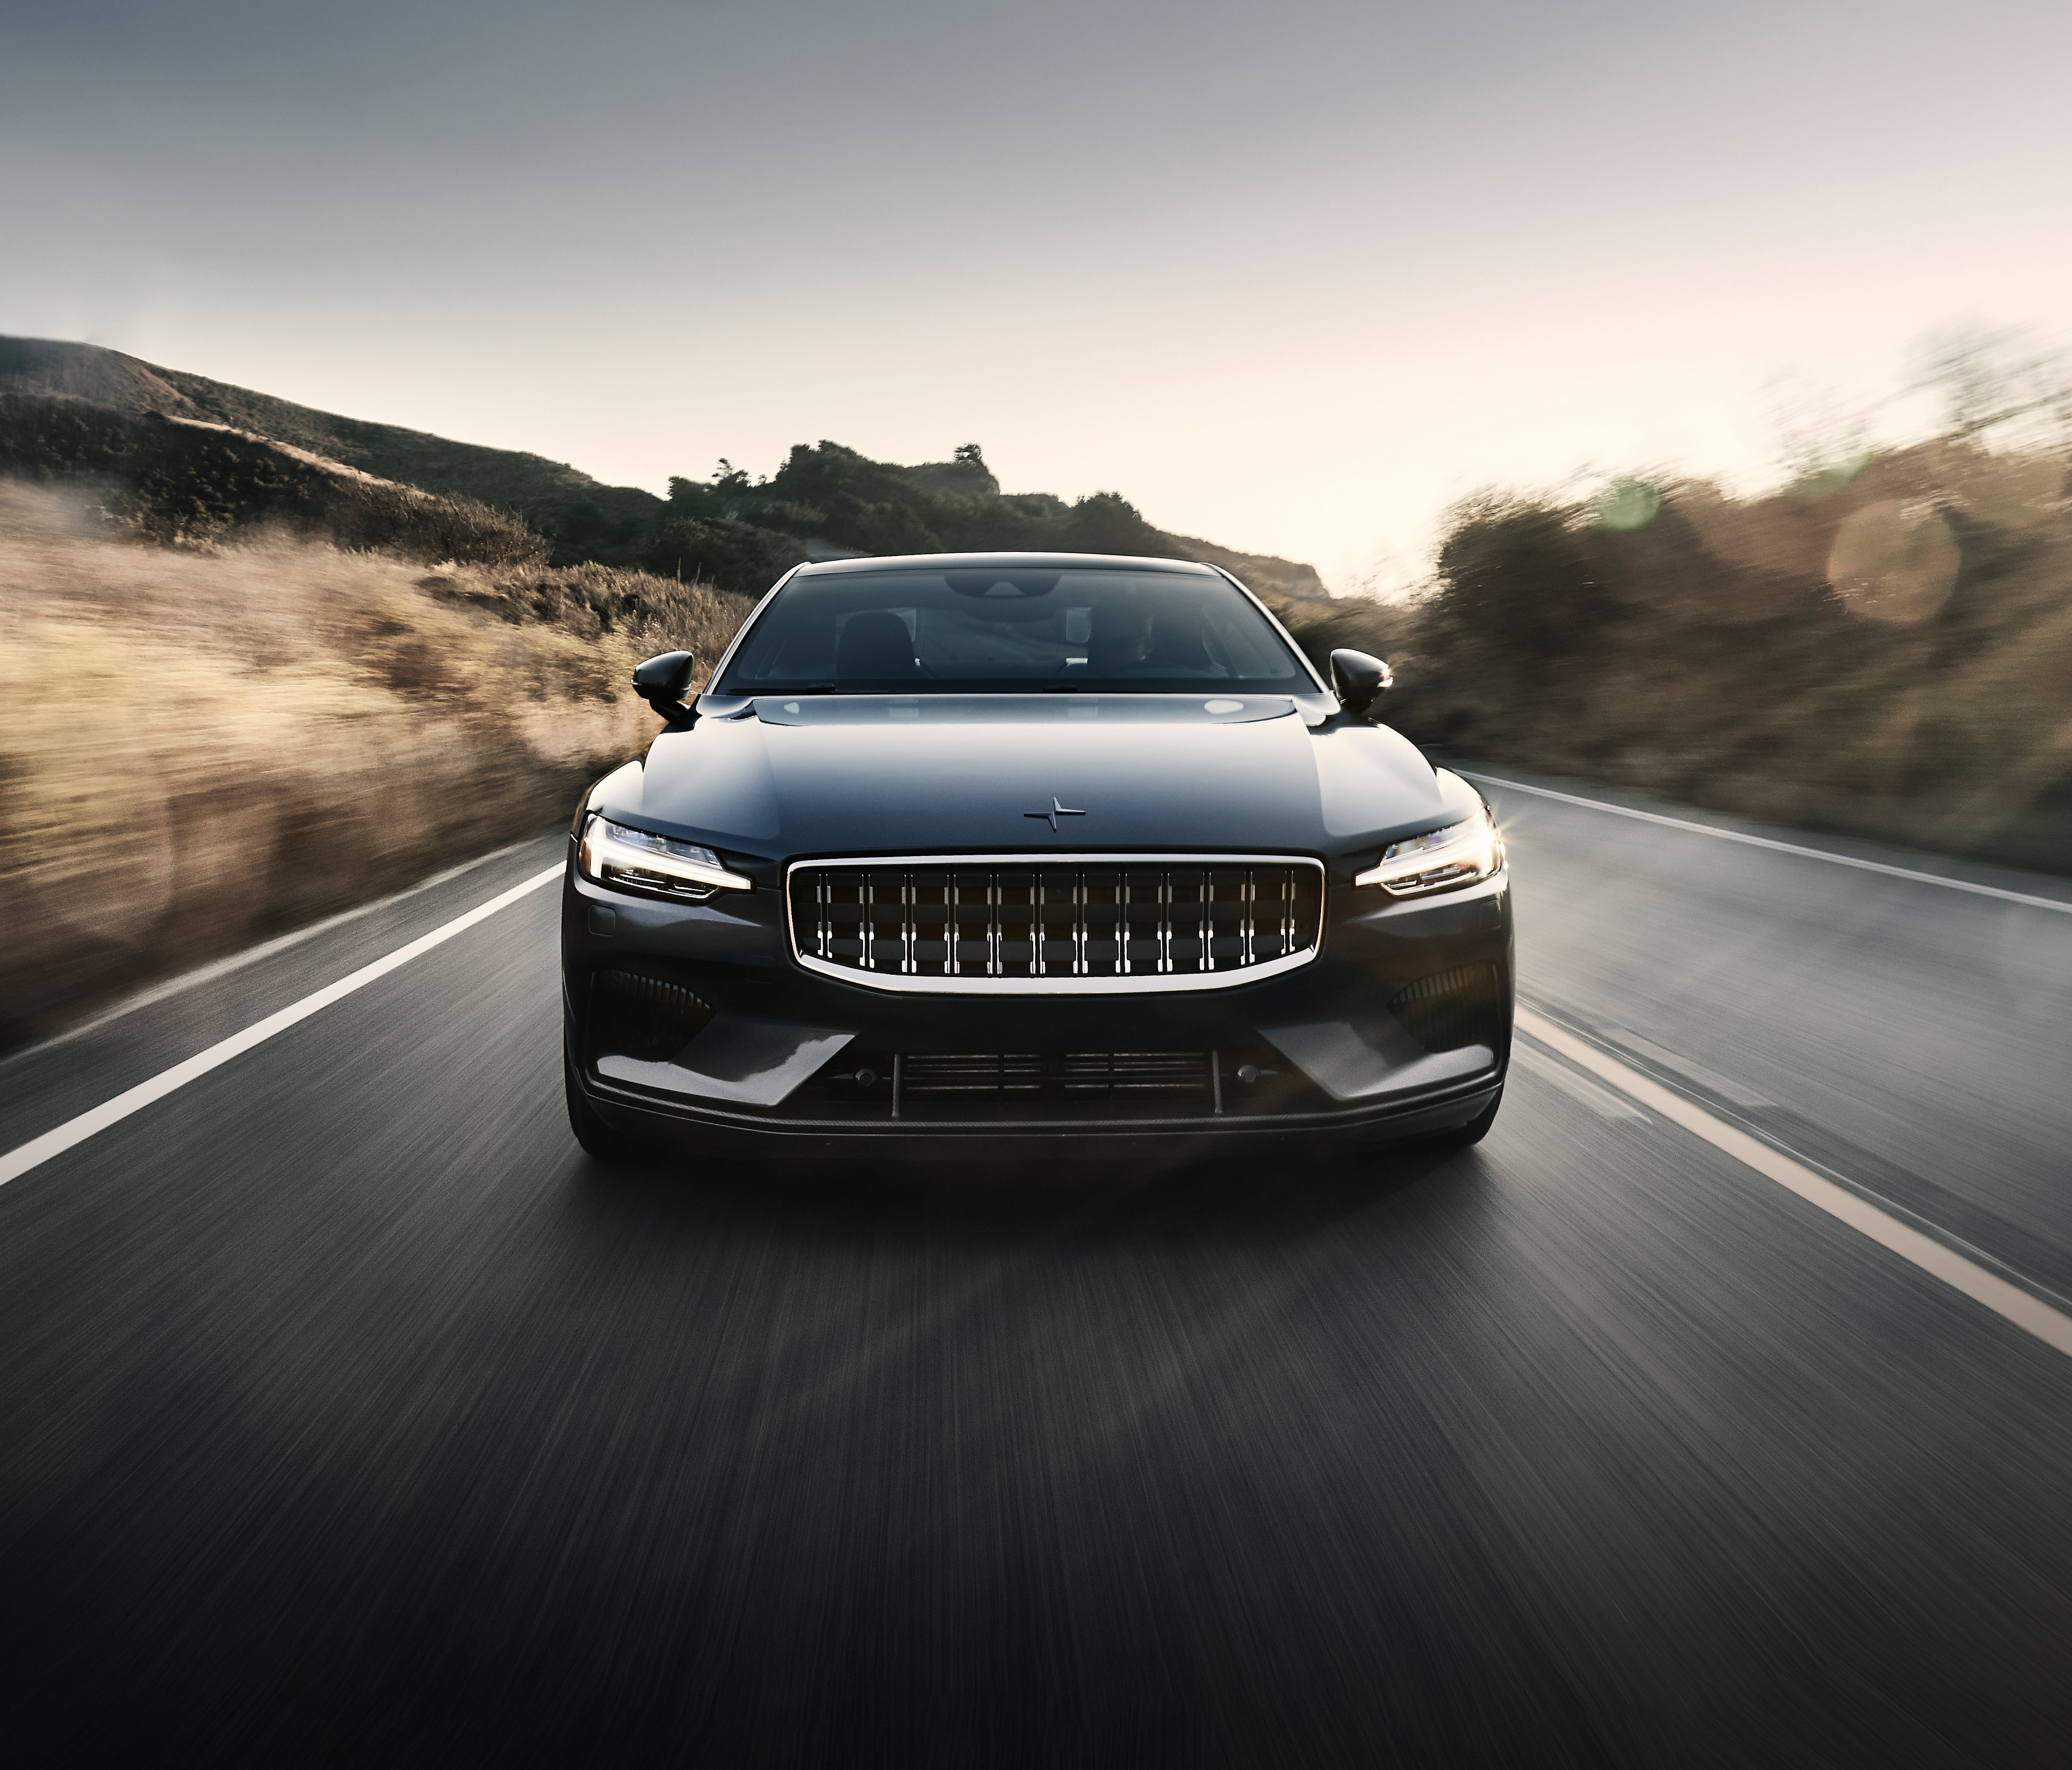 2021 Polestar 1 Is a Plug-In Hybrid Concept Car Brought to Life